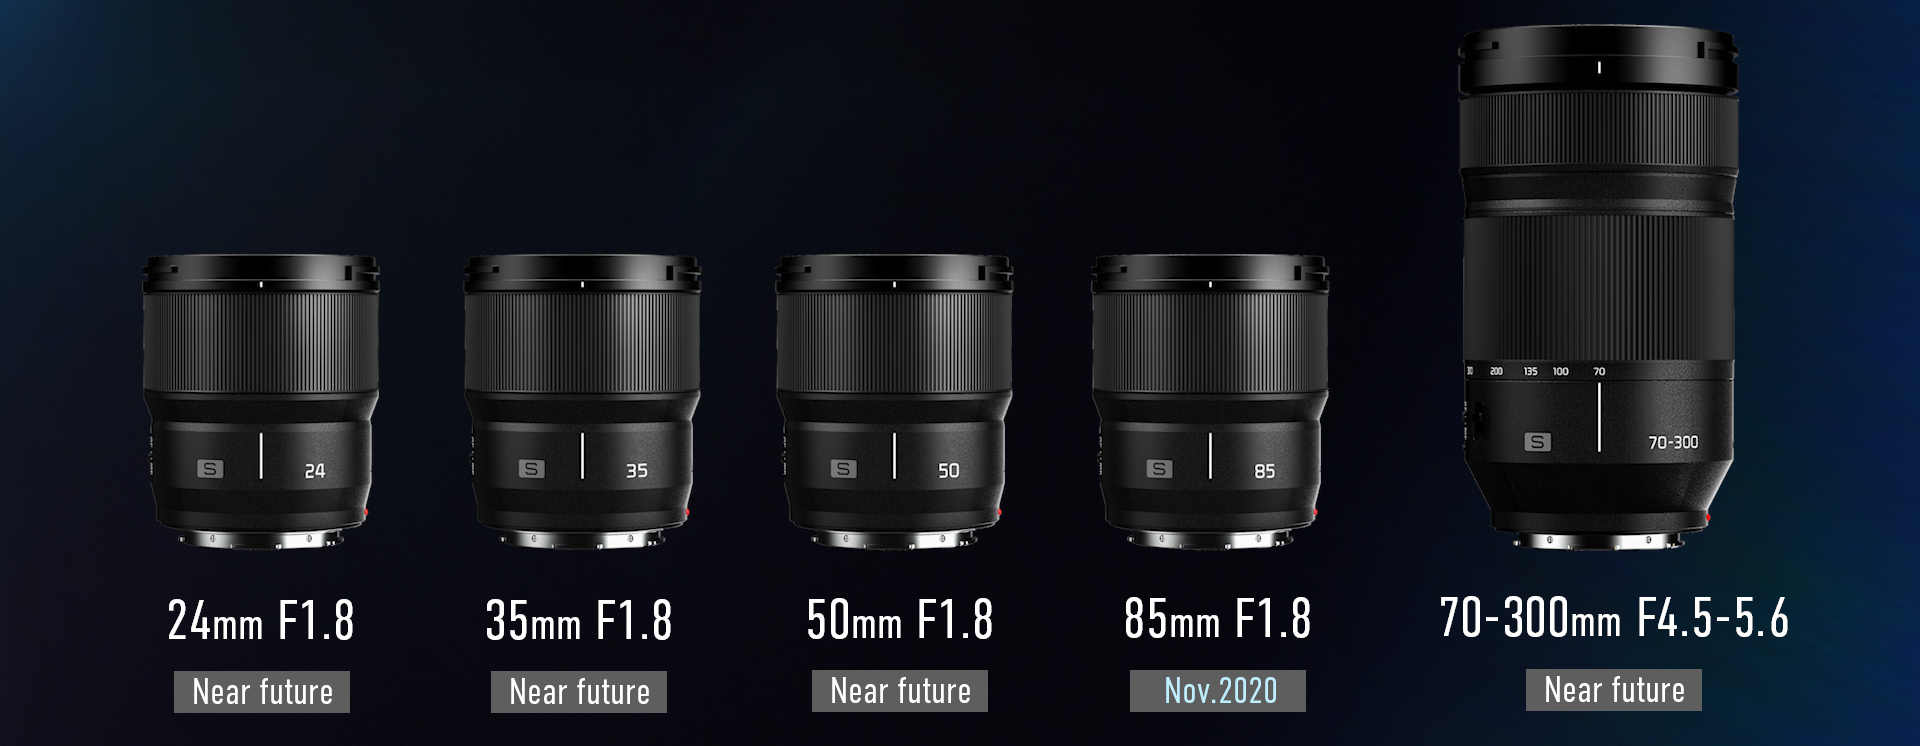 Panasonic LUMIX S 85mm F1.8 for L-Mount Launched, 50mm, 35mm